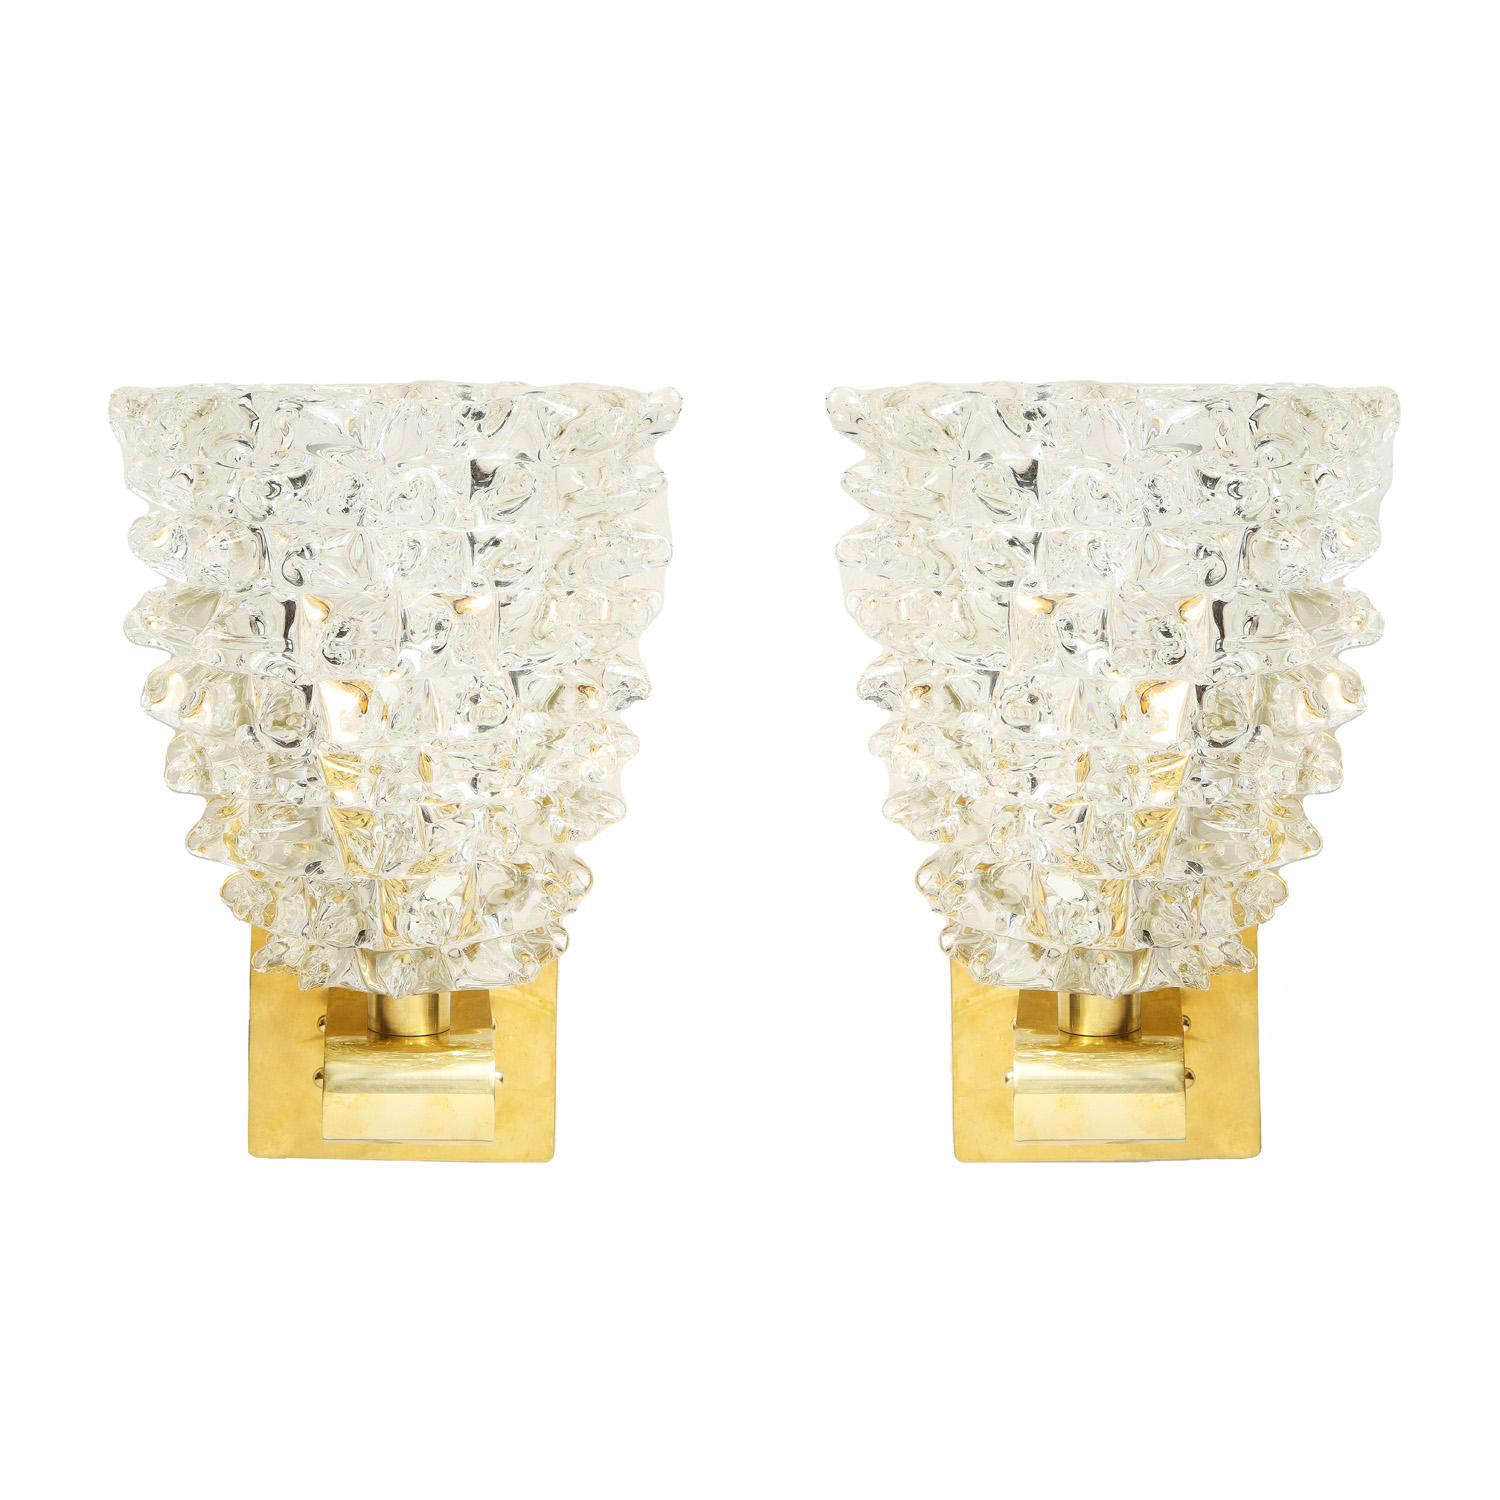 Pair of Murano clear glass and brass spiked, 